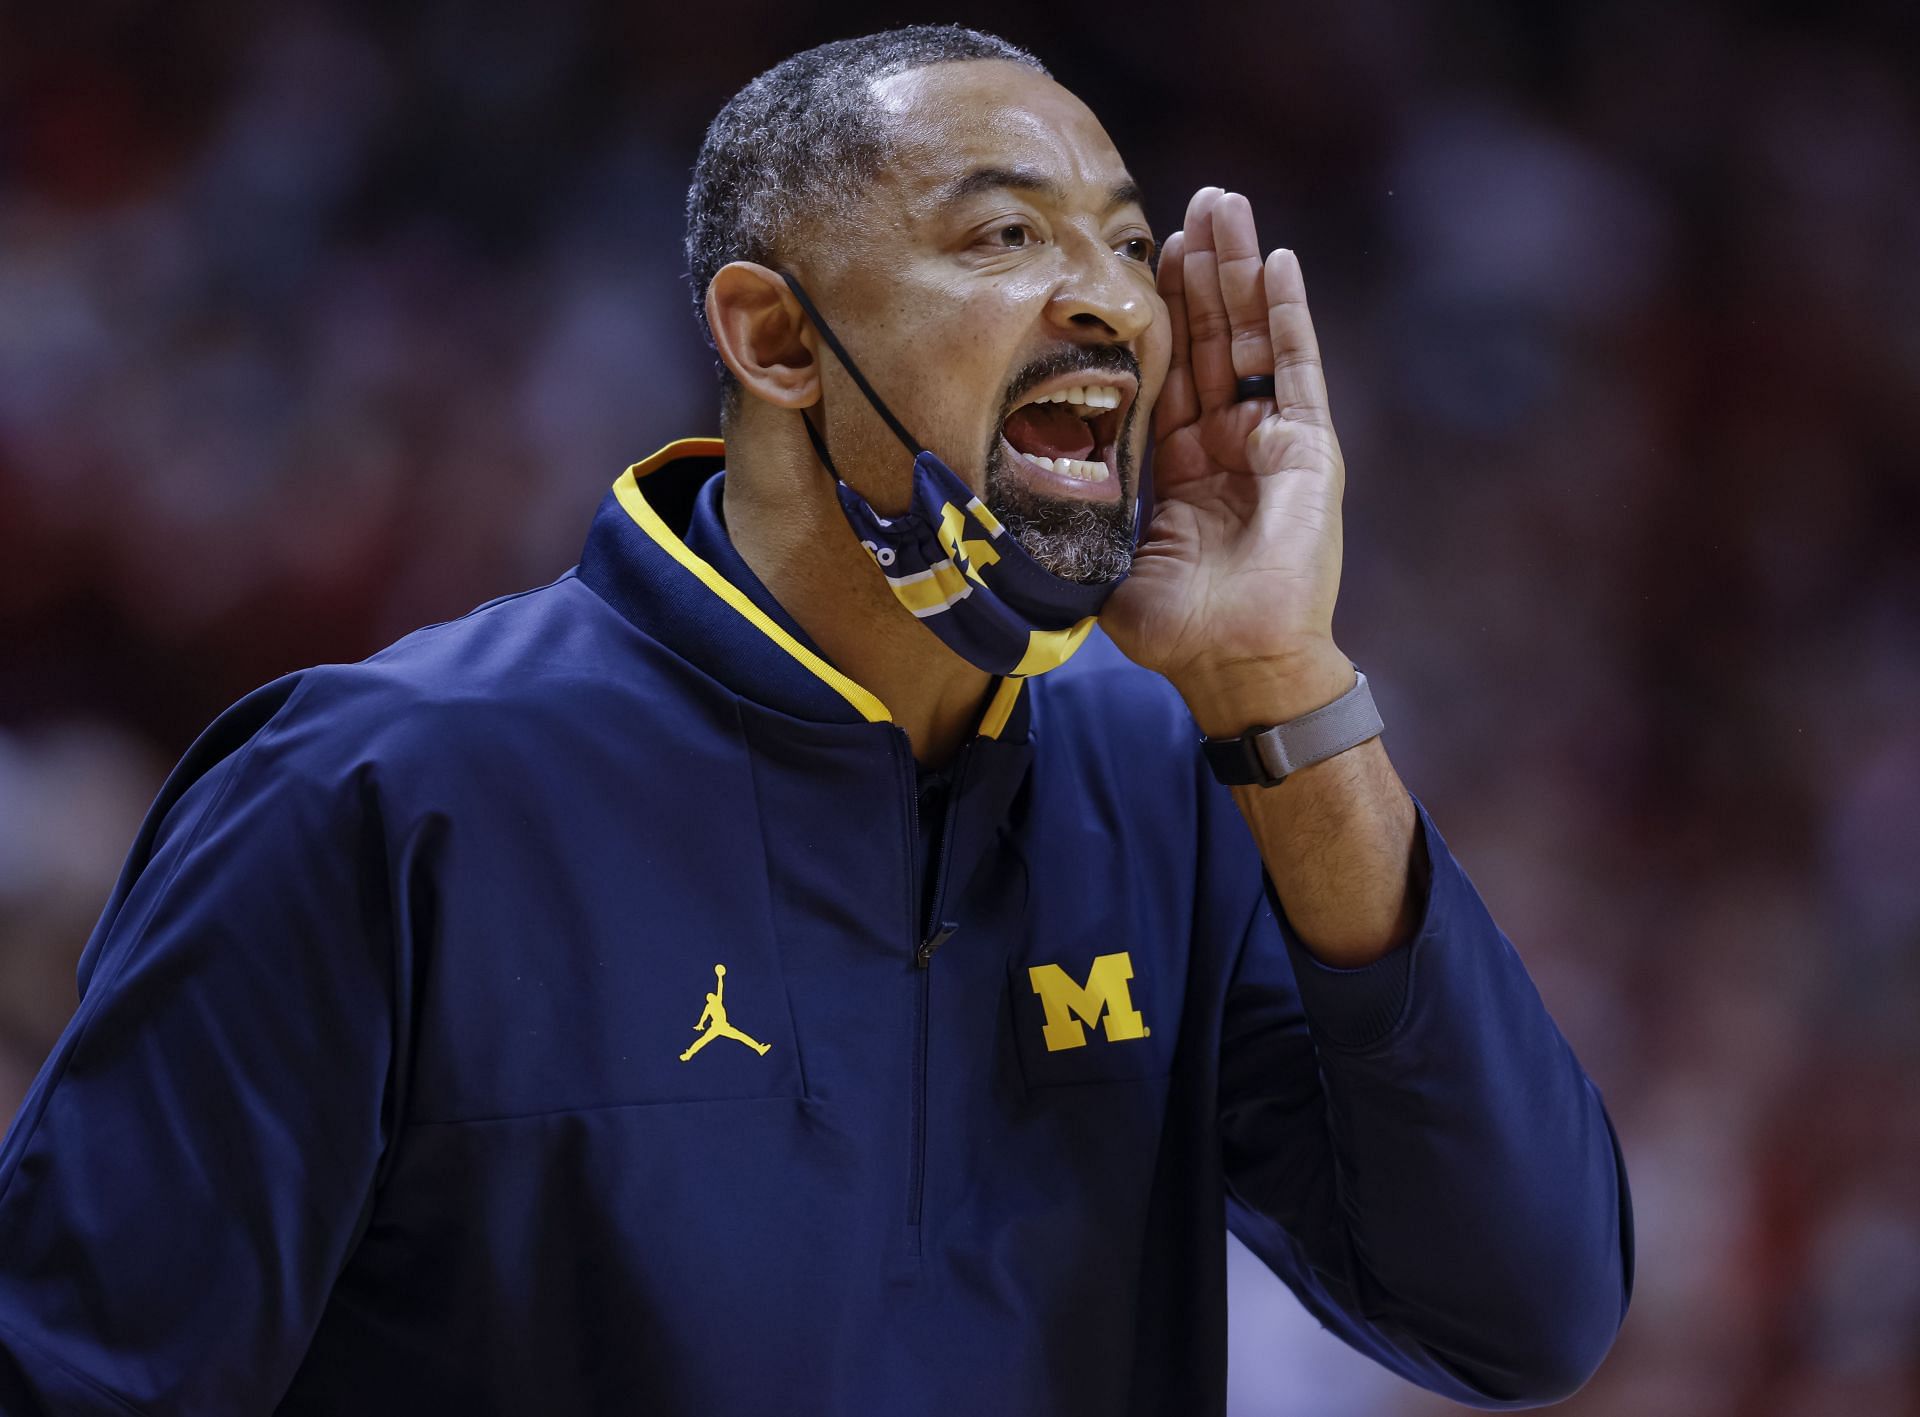 Michigan coach Juwan Howard has been suspended five games after a post-game incident with the Wisconsin coaching staff Sunday,